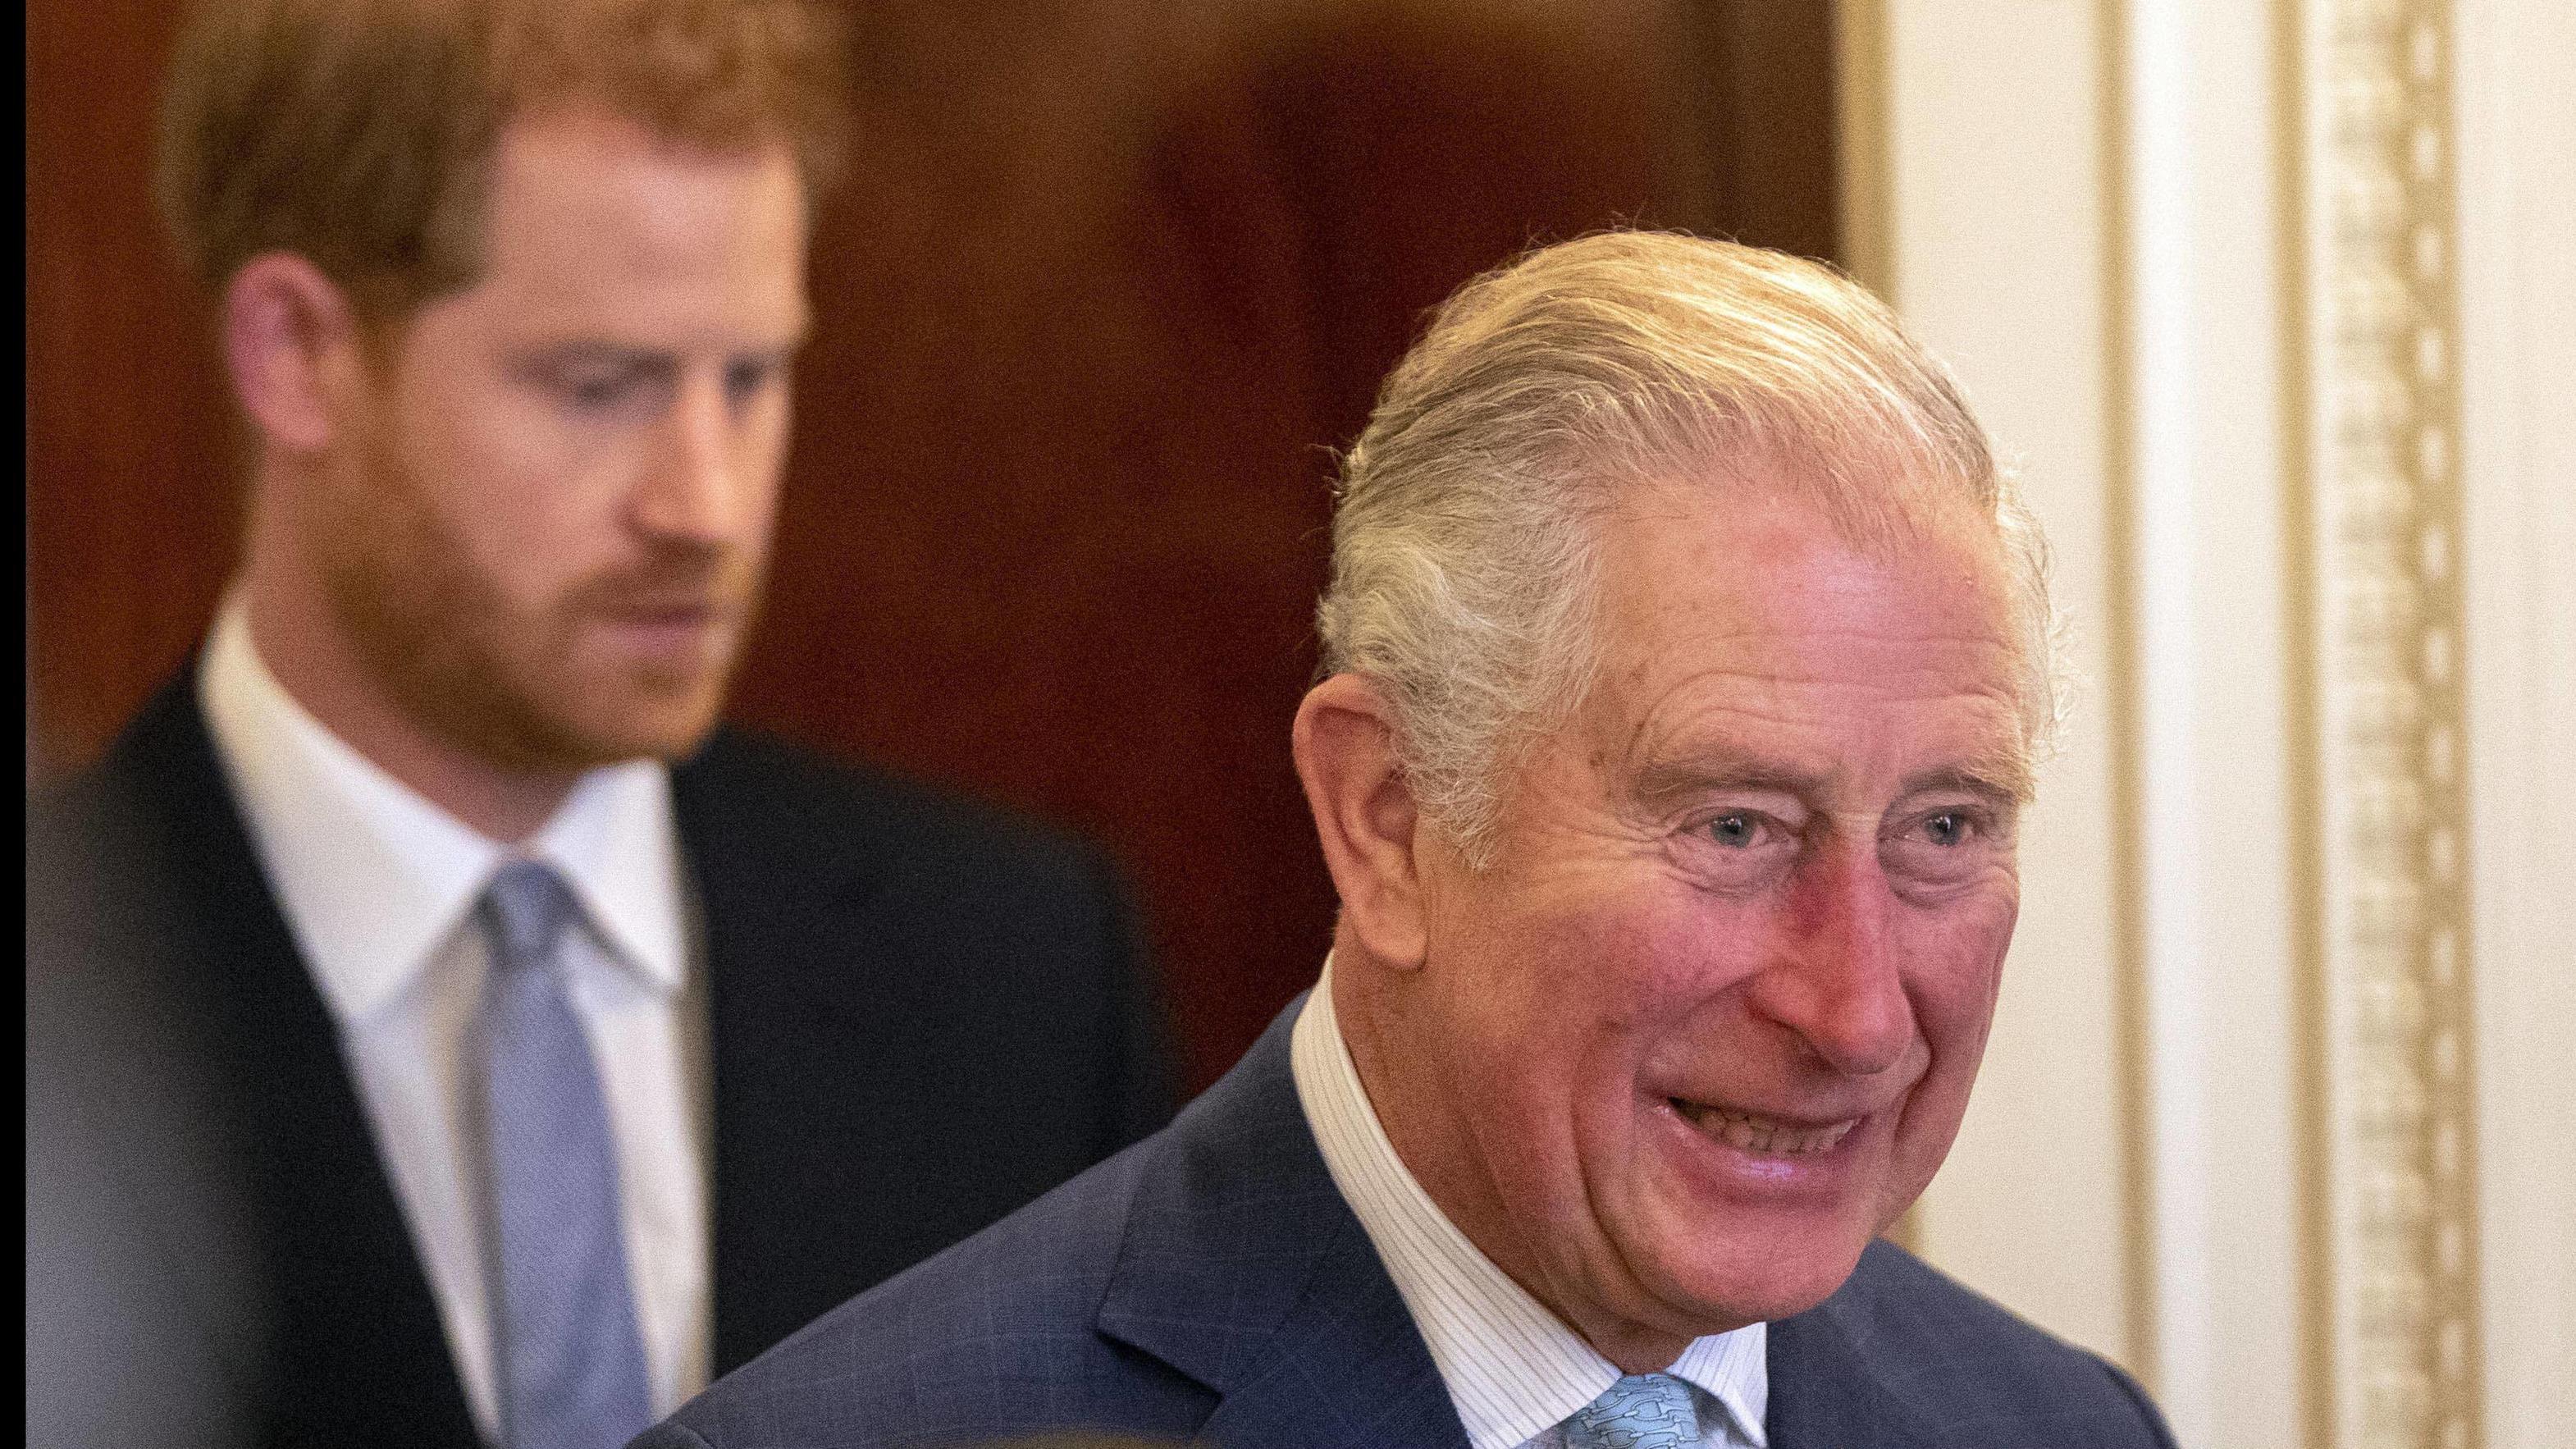  . 12/12/2018. London, United Kingdom. Prince Charles and Prince Harry -Violent youth crime forum. The Prince of Wales and the Duke of Sussex during a discussion about violent youth crime at a forum held at Clarence House in London. PUBLICATIONxINxGE